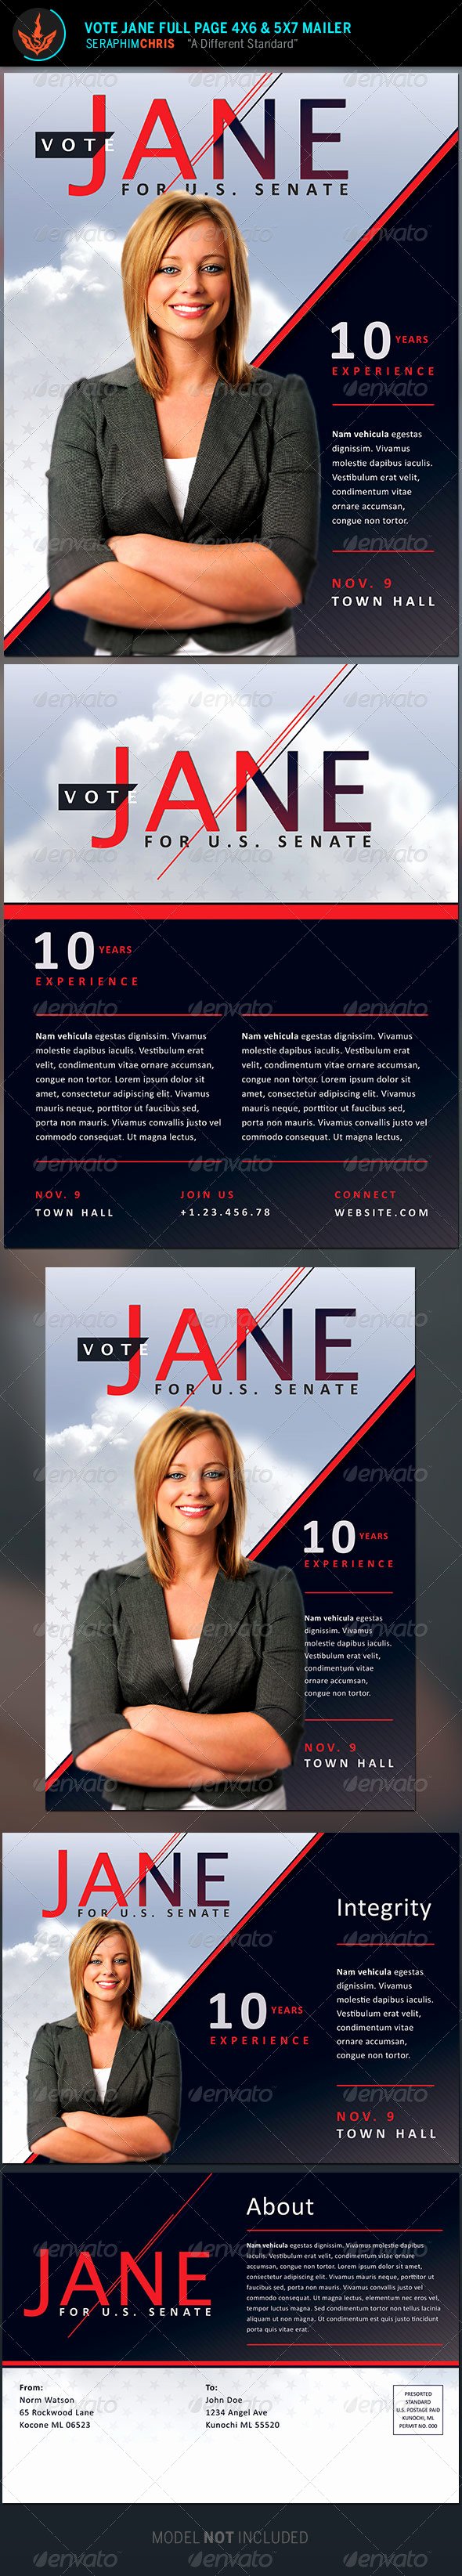 Political Mailers Template Elegant Jane Political Flyer and Mailer Template by Seraphimchris